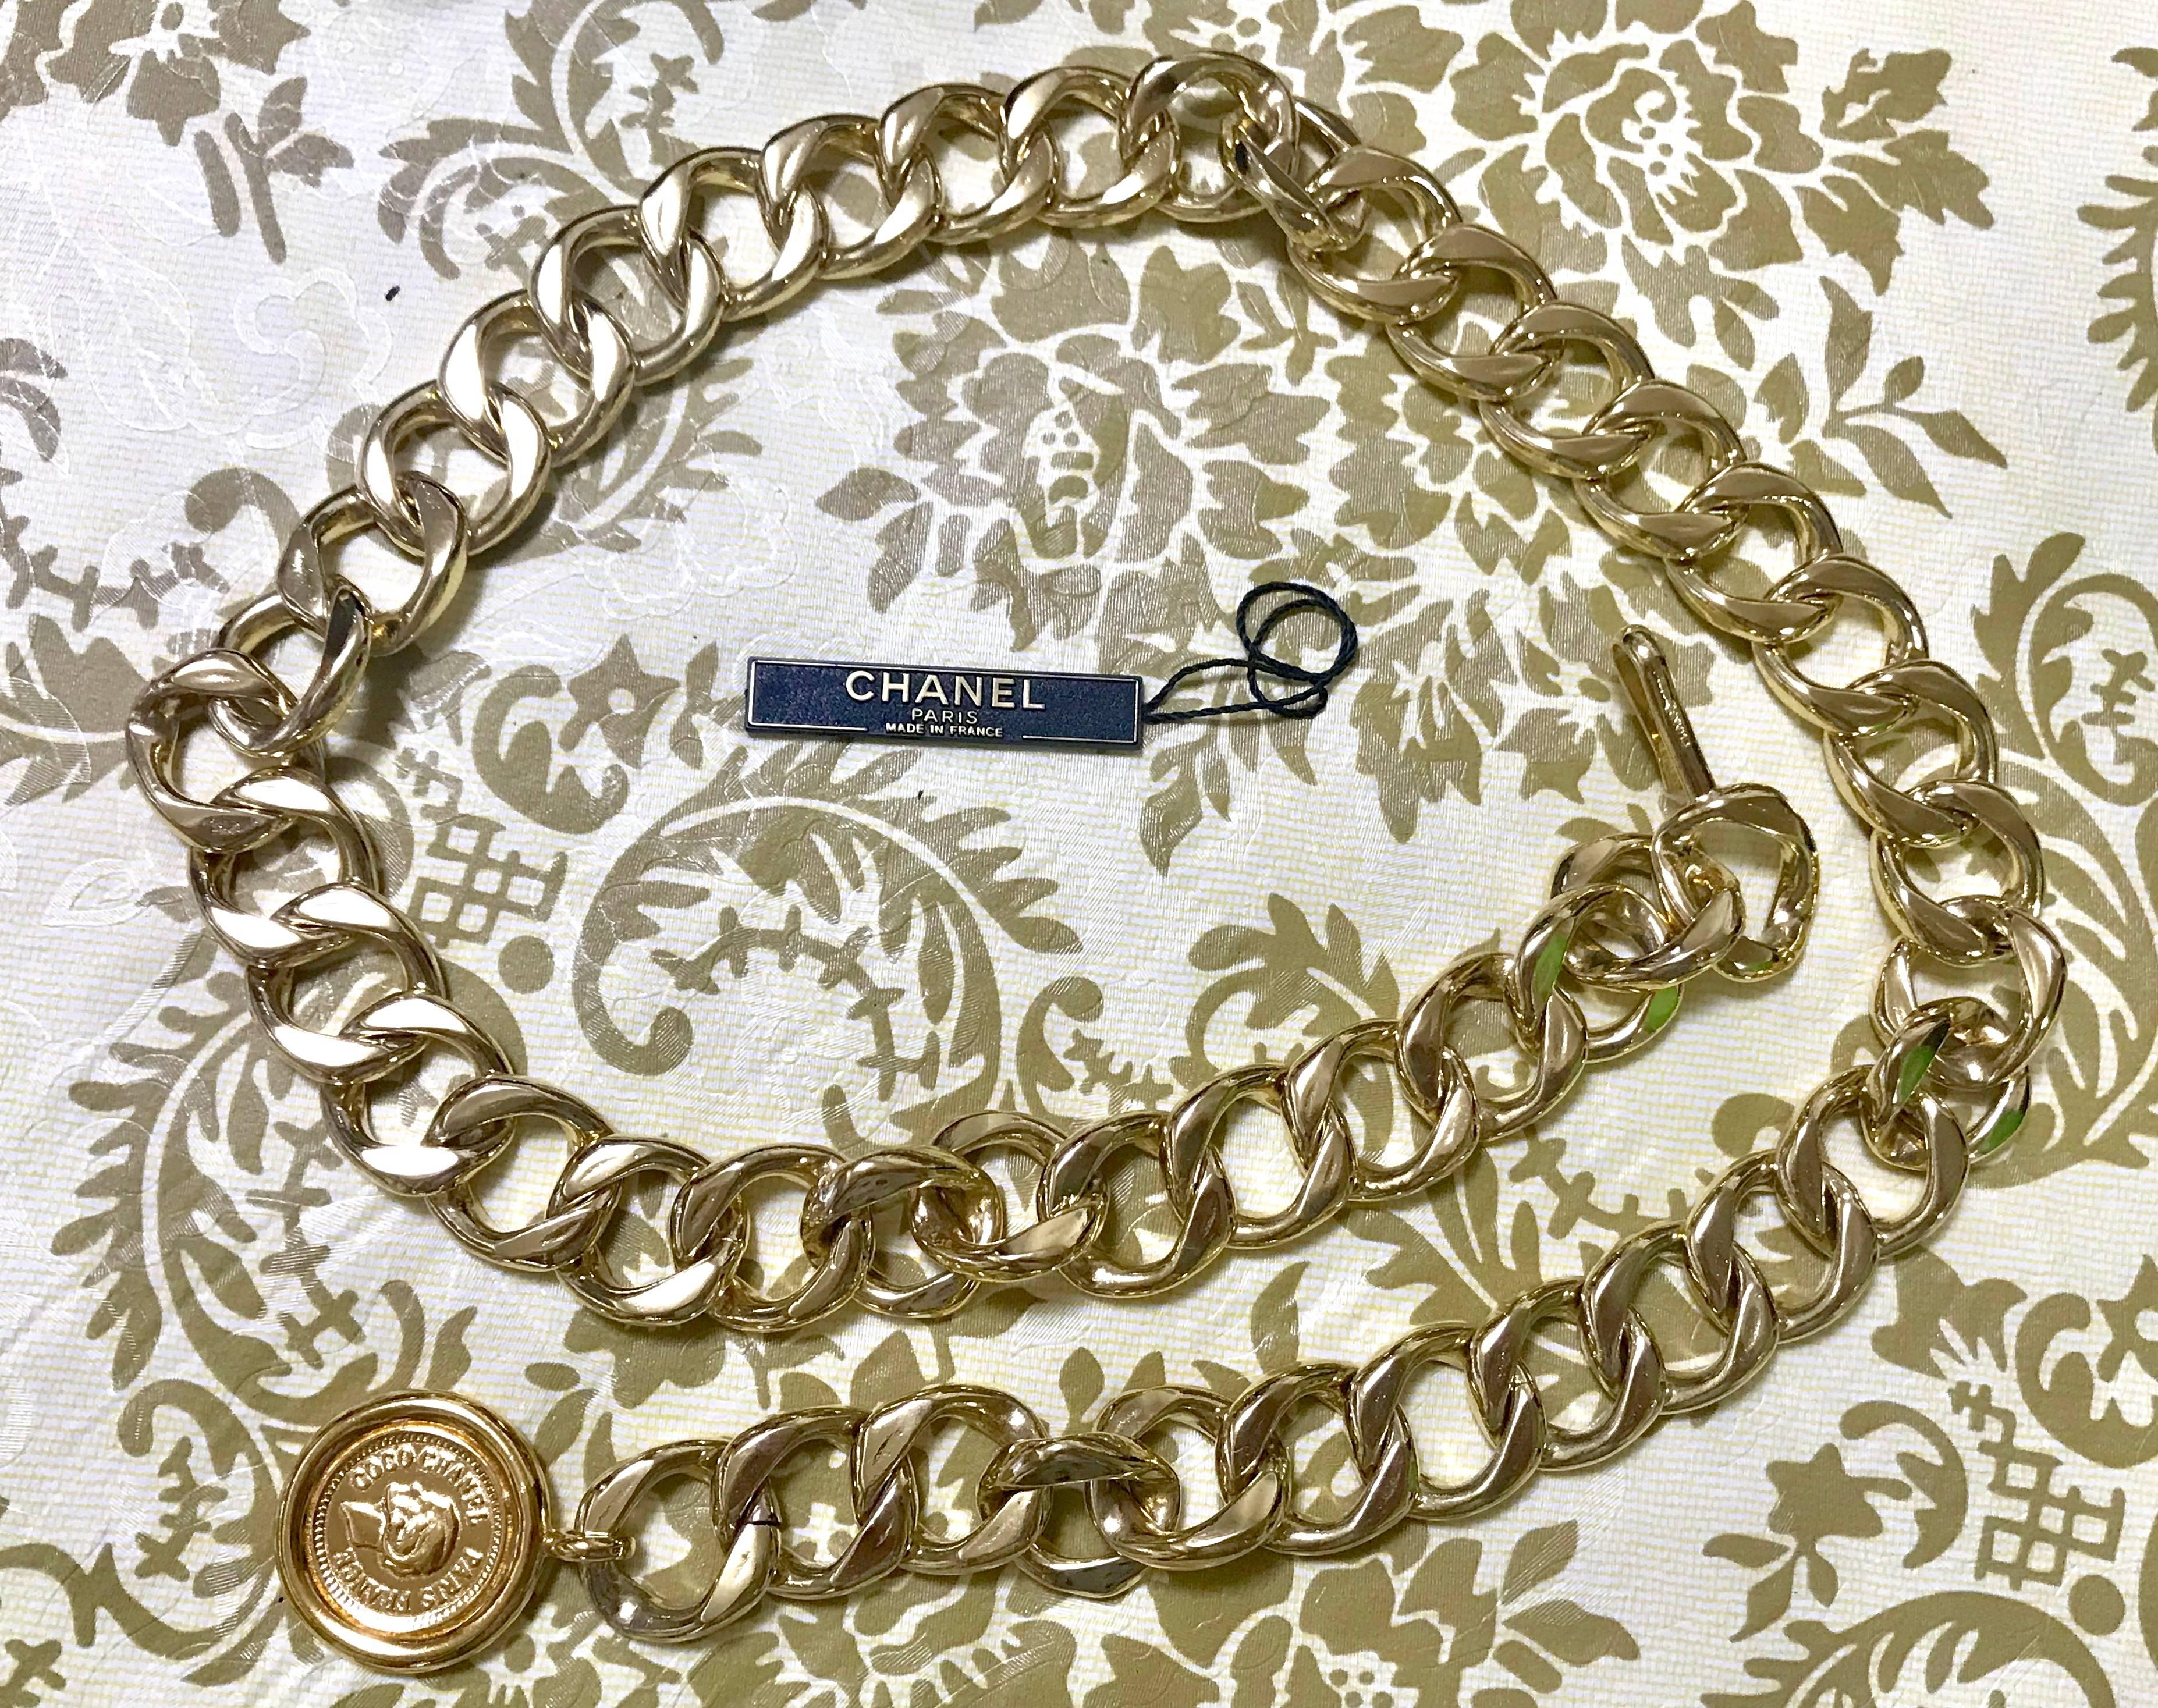 MINT. 80's Vintage CHANEL golden thick chain belt with round CC and mademoiselle charm. Nice and heavy single layer belt from CHANEL.

MINT/excellent vintage condition!

Introducing a nice and heavy, golden thick chain belt with its iconic